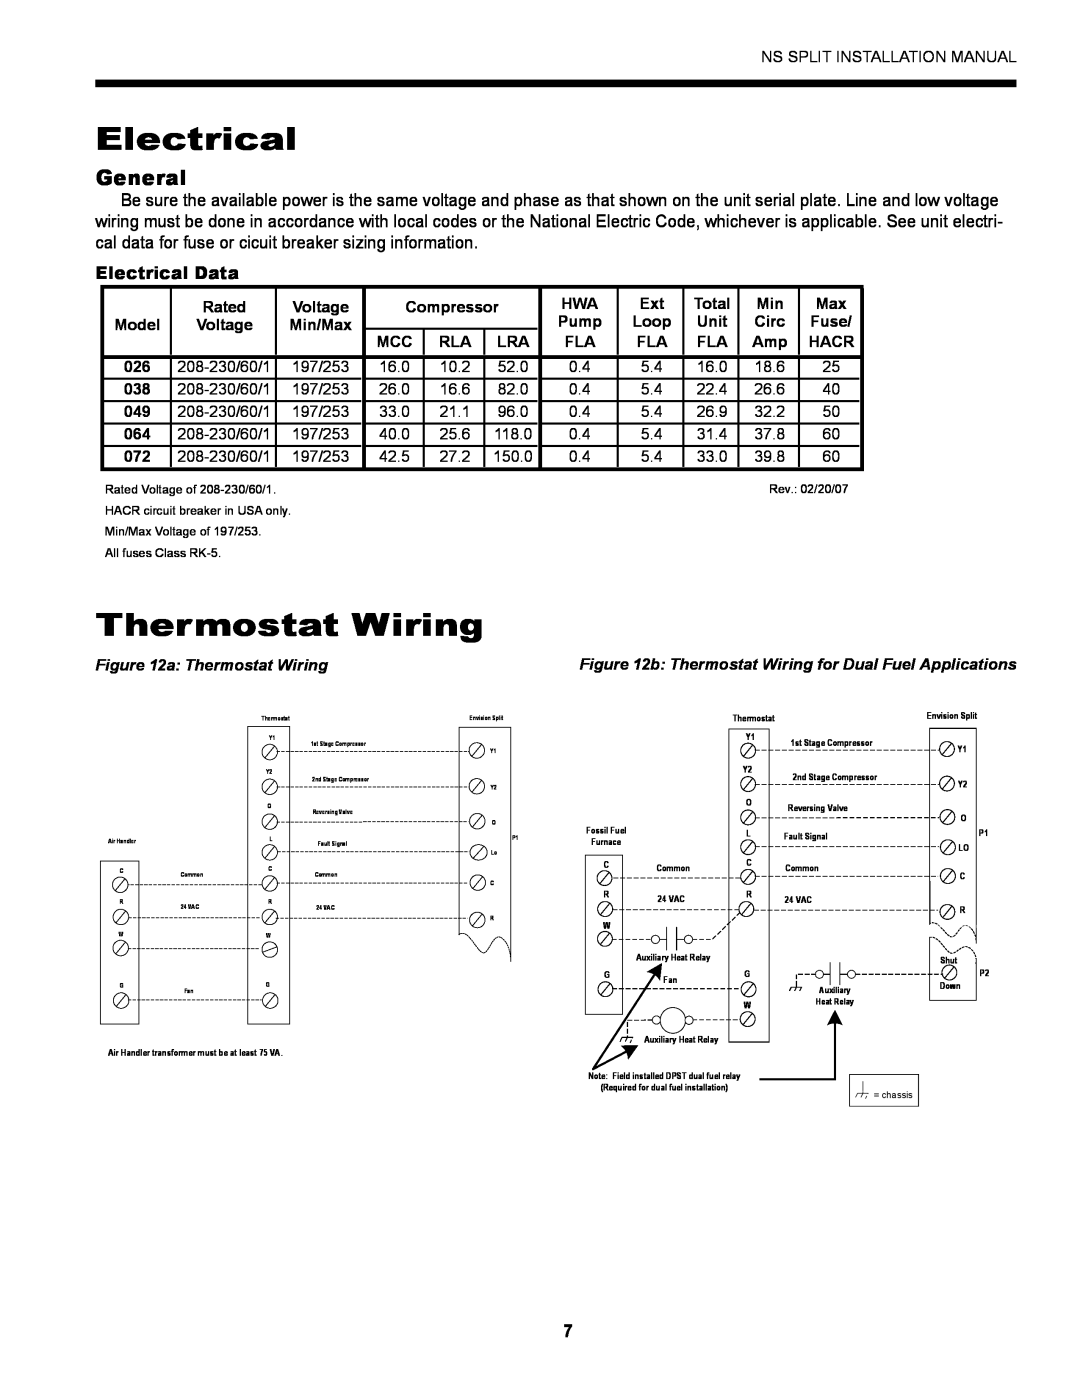 Envision Peripherals Series installation manual Electrical, General, a Thermostat Wiring 